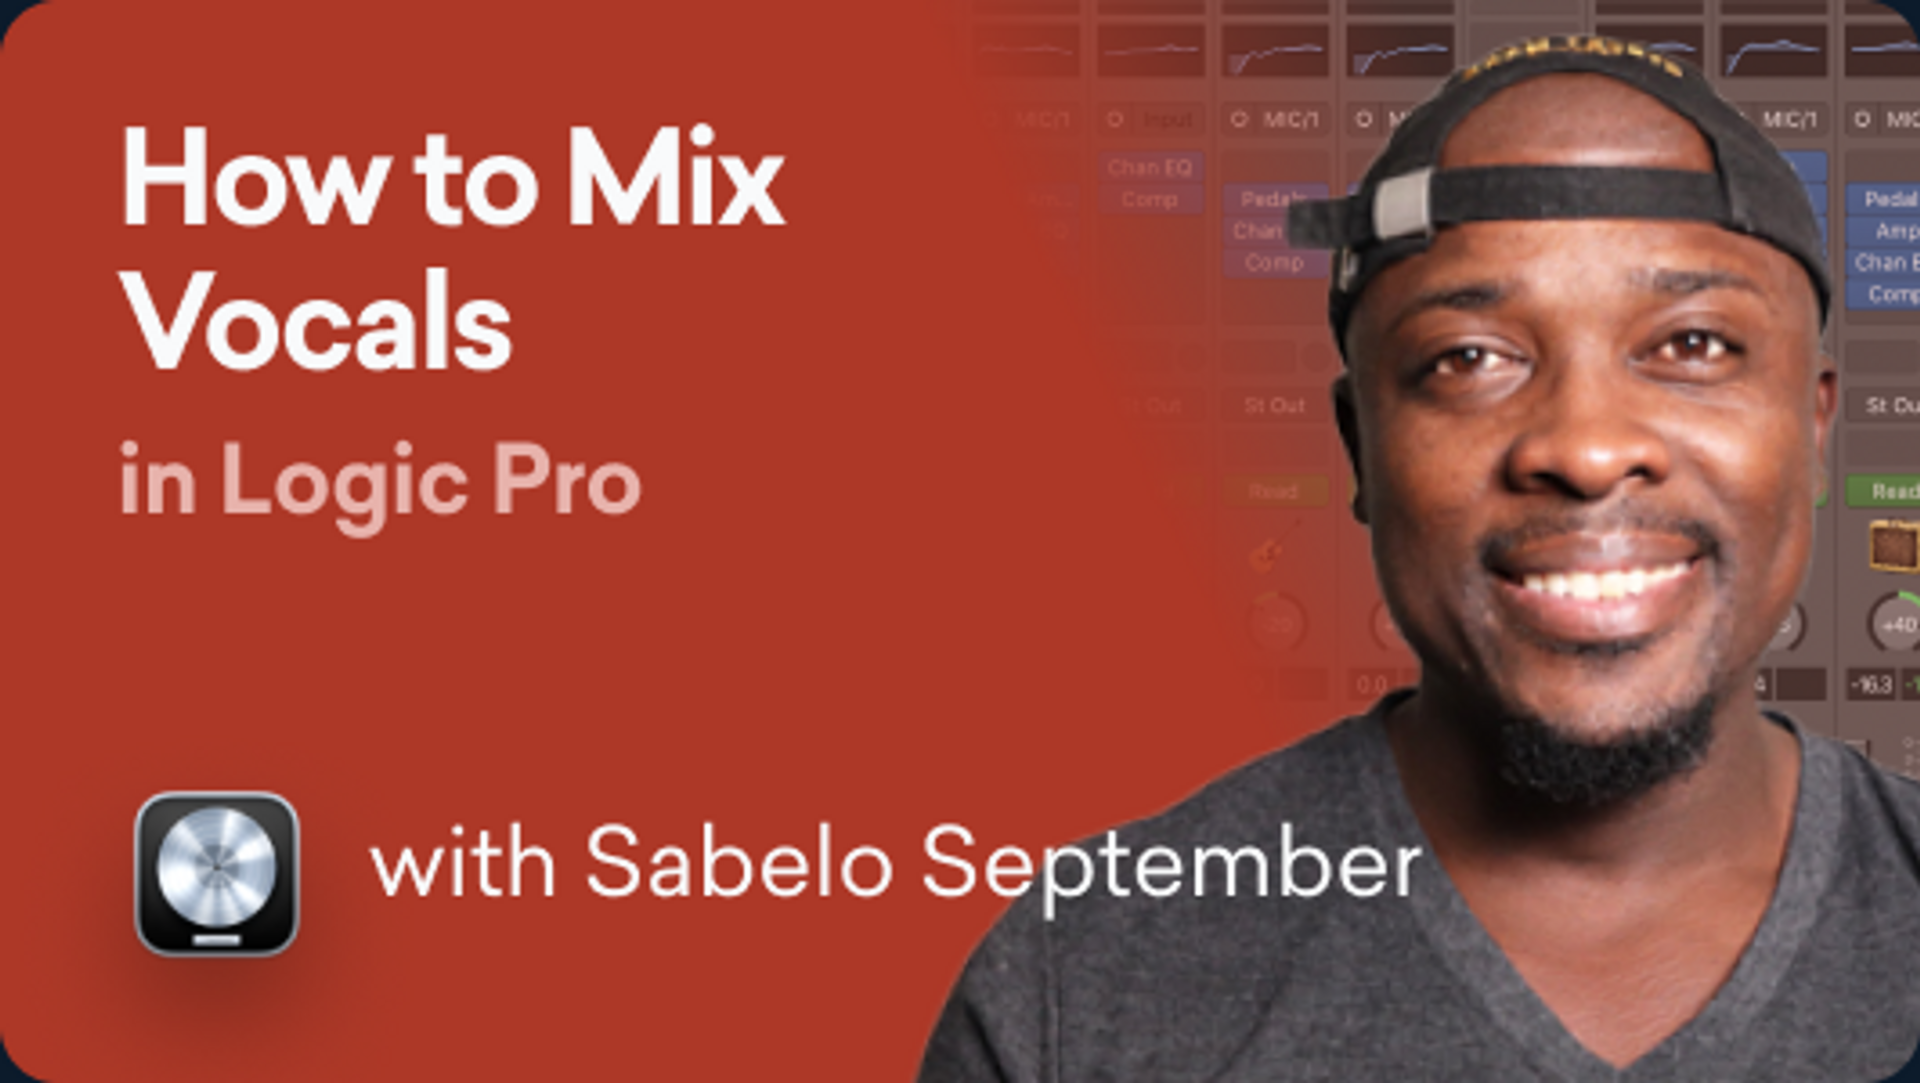 How to Mix Vocals in Logic Pro